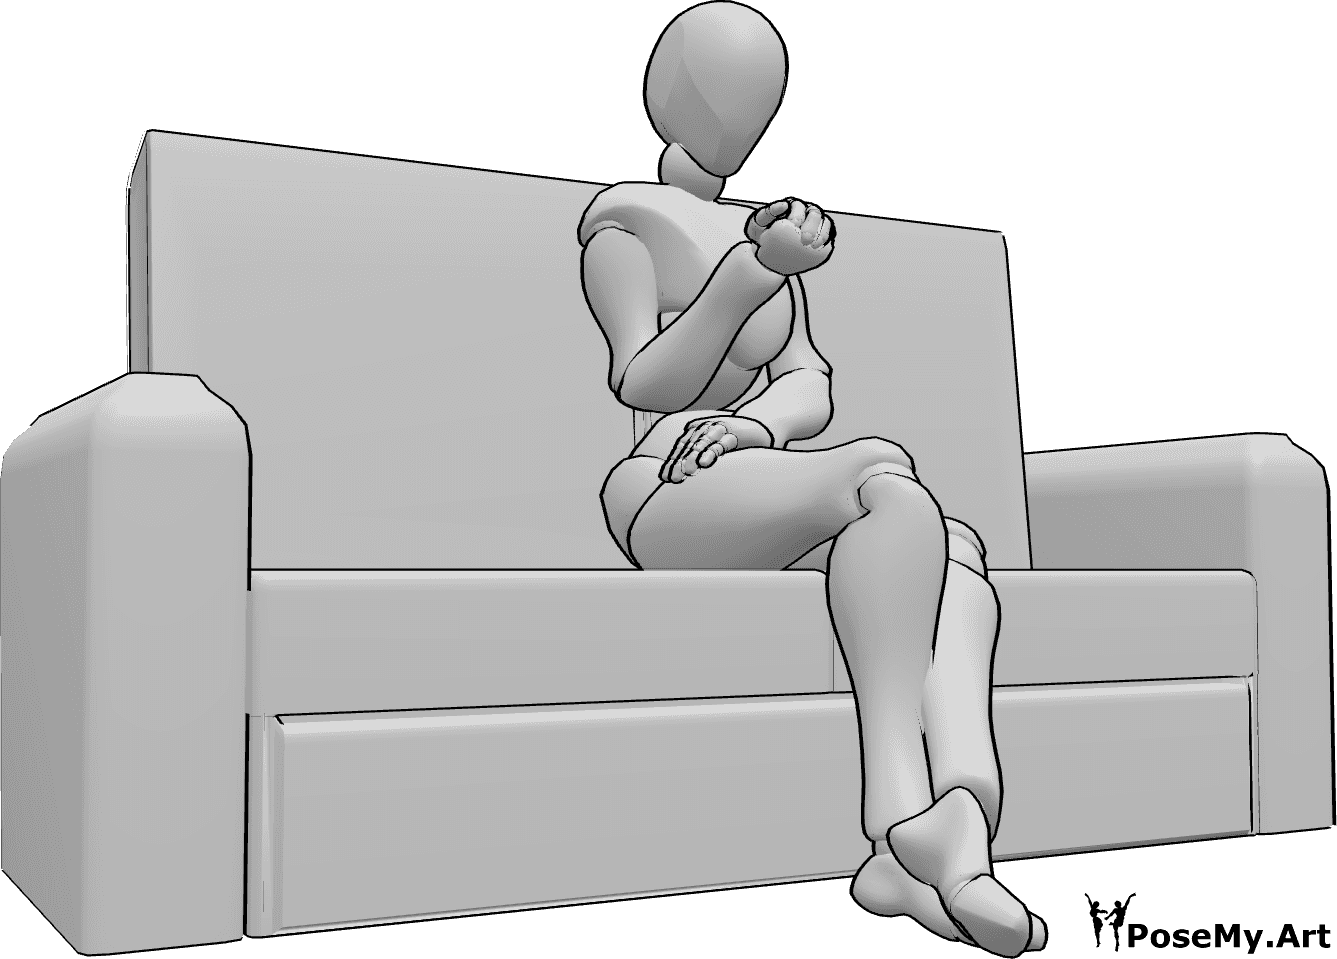 Pose Reference- Female sitting waiting pose - Female is sitting on the couch with her legs crossed, waiting for something, looking at her nails